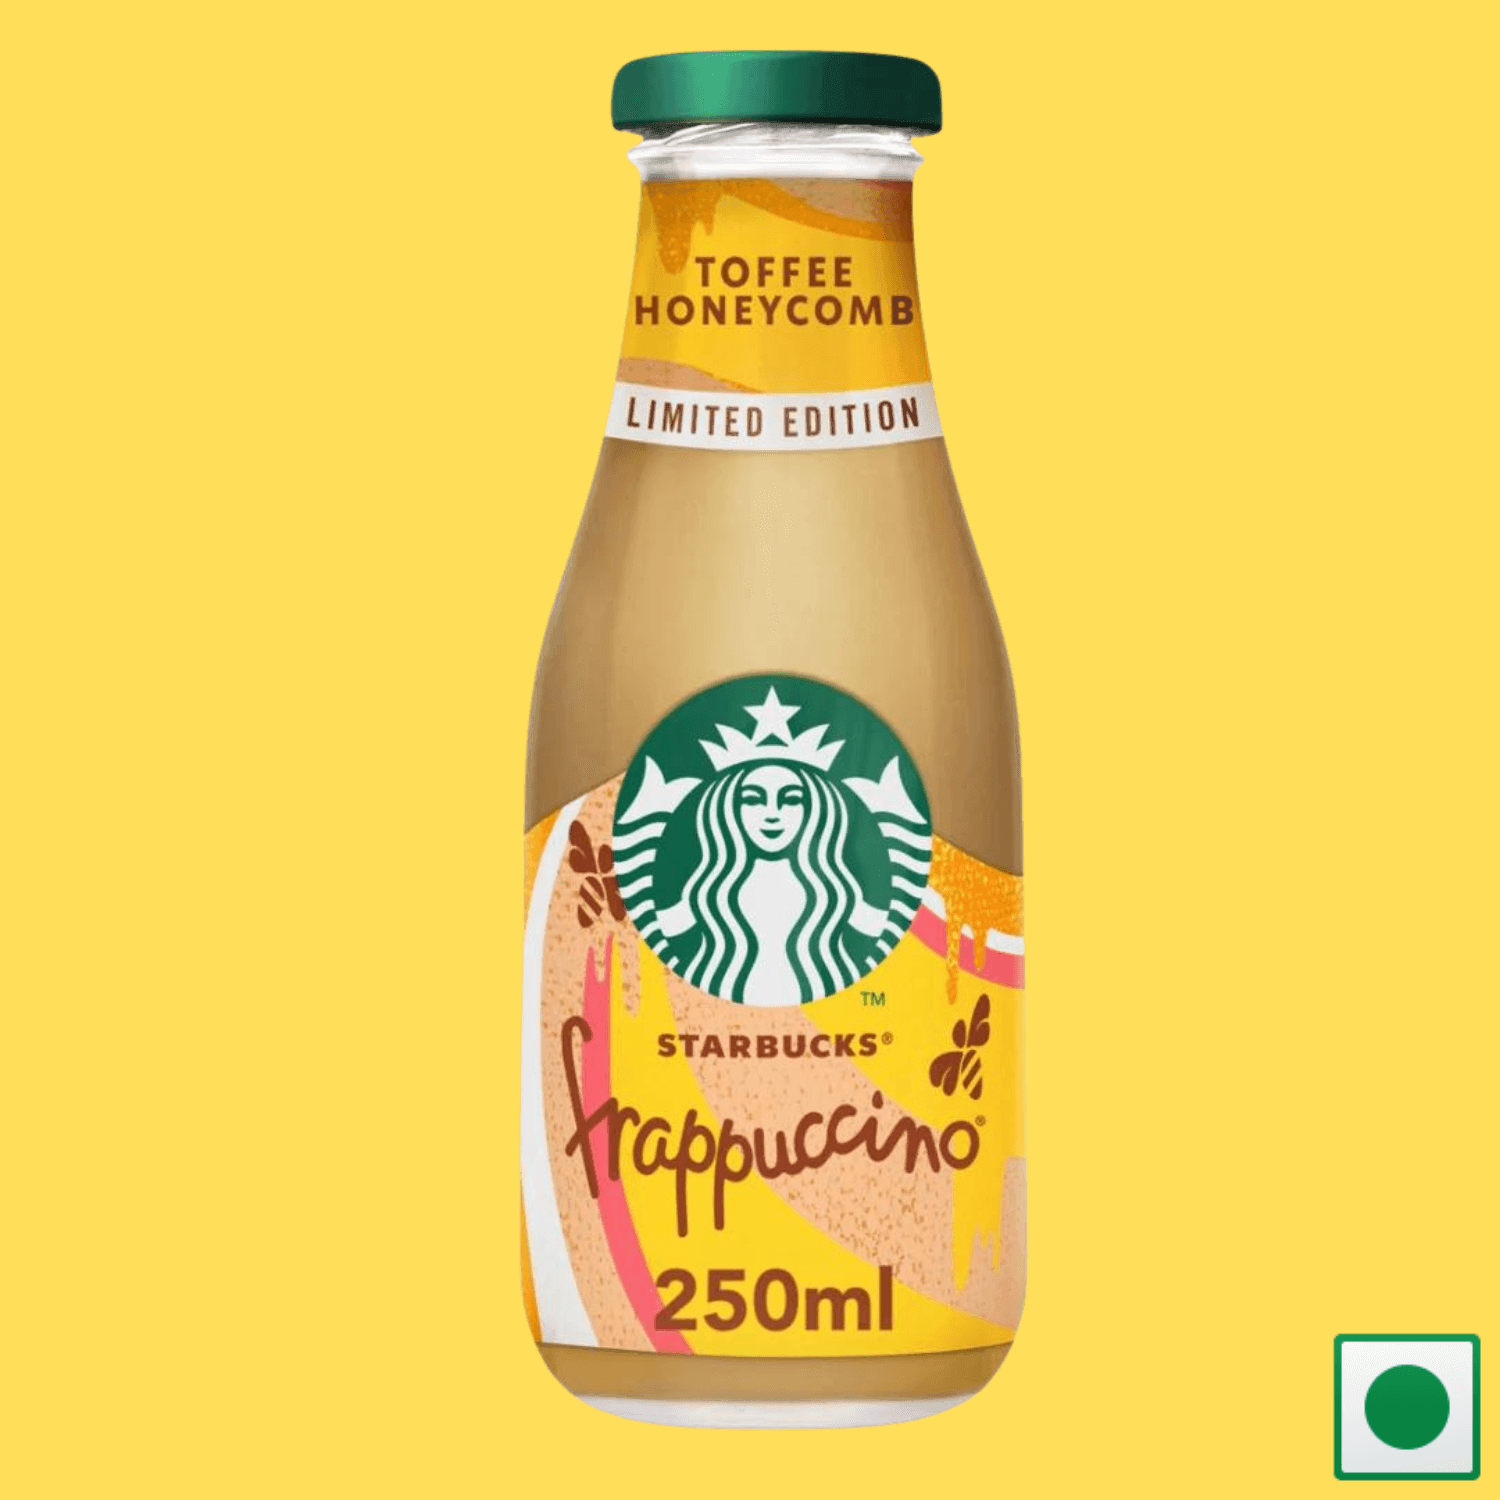 Starbucks Limited Edition Frappuccino Golden Toffee Honeycomb Coffee Drink, 250ml (Imported) - Super 7 Mart